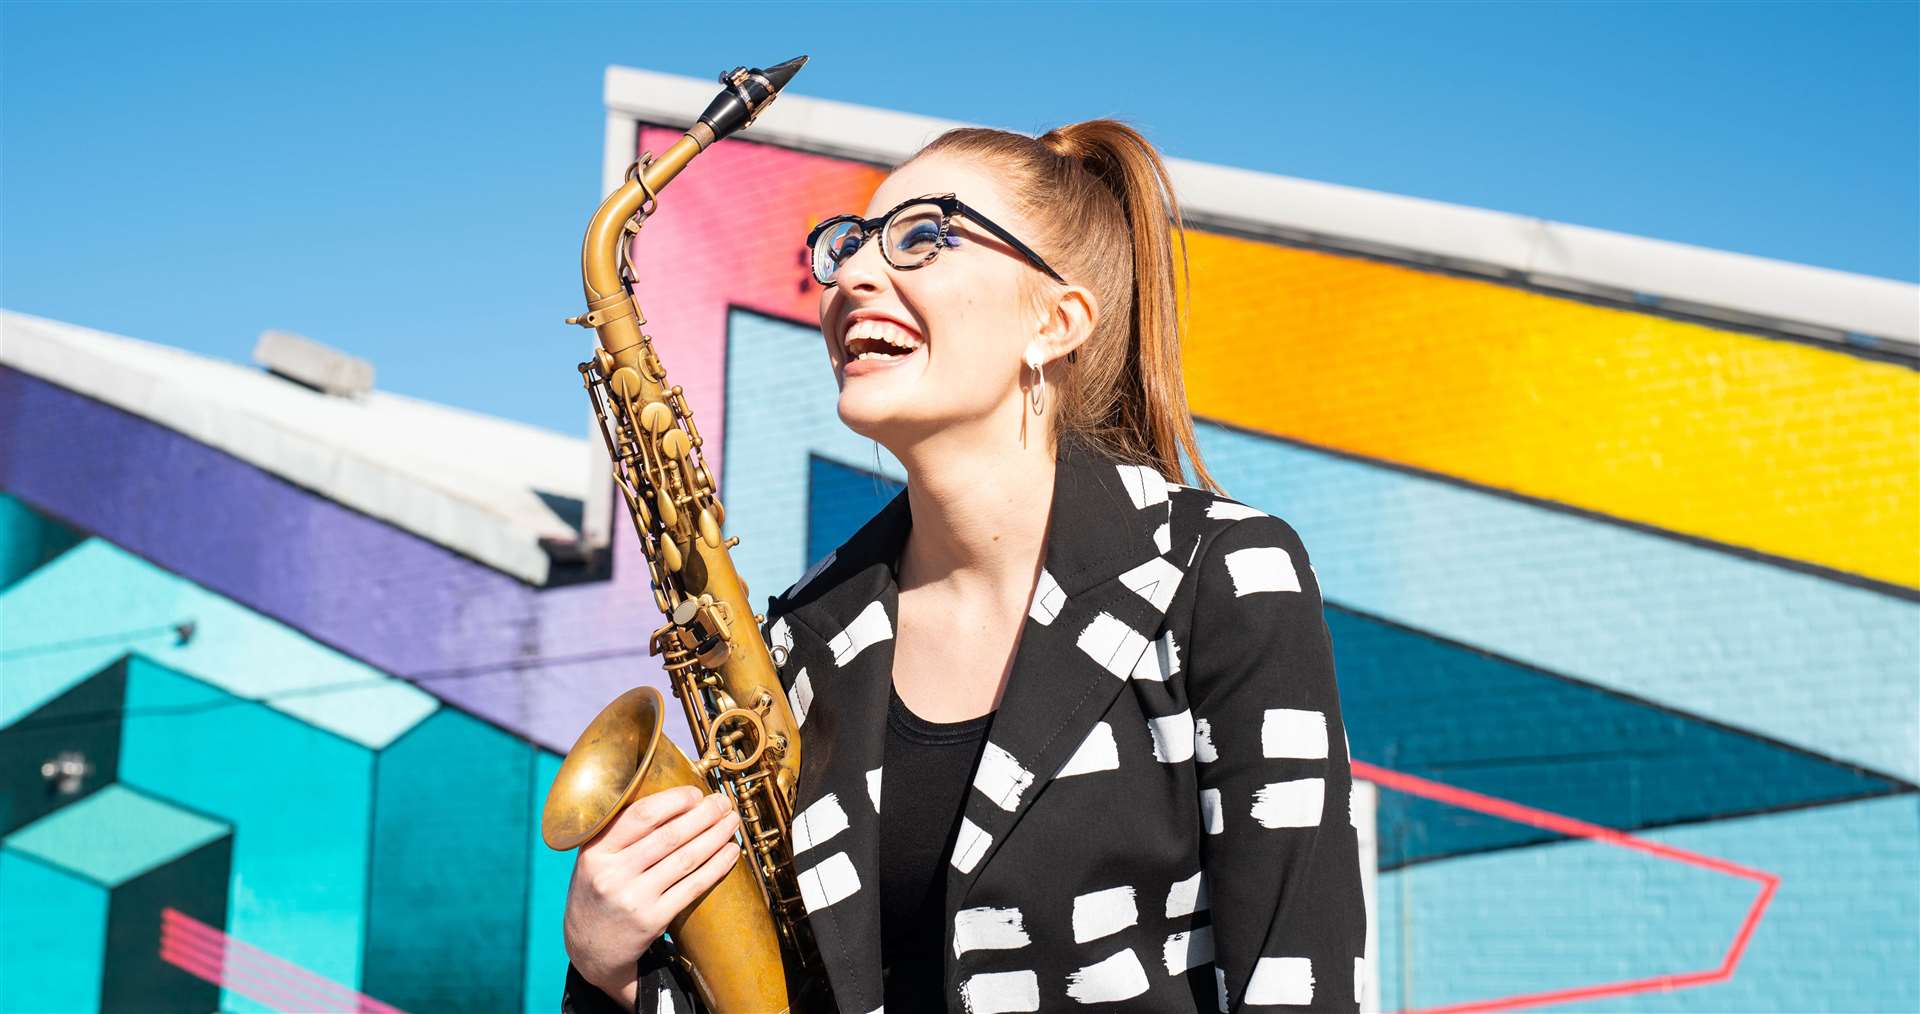 Don’t miss the world premiere of The Keys of Canterbury, a Canterbury Festival commission by John Harle performed by one of the UK’s brightest stars, saxophonist Jess Gillam. (16173273)